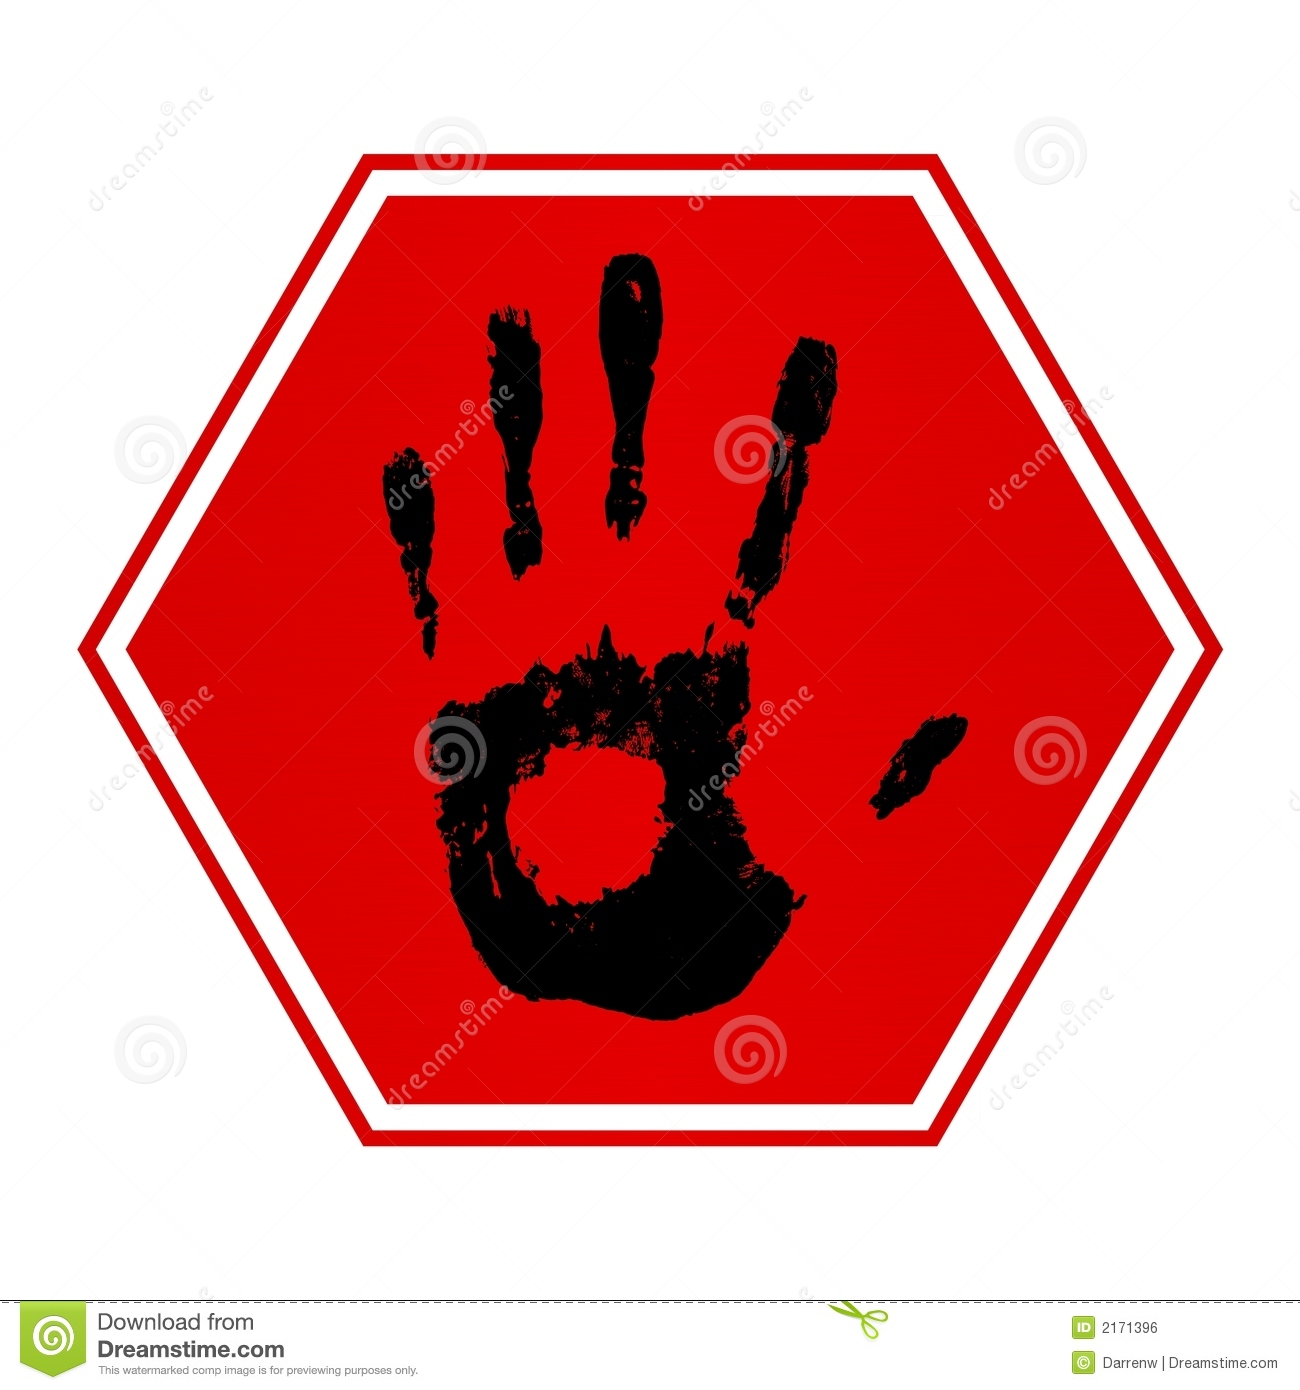 Stop Hand Clipart Stop Hand Royalty Free Stock